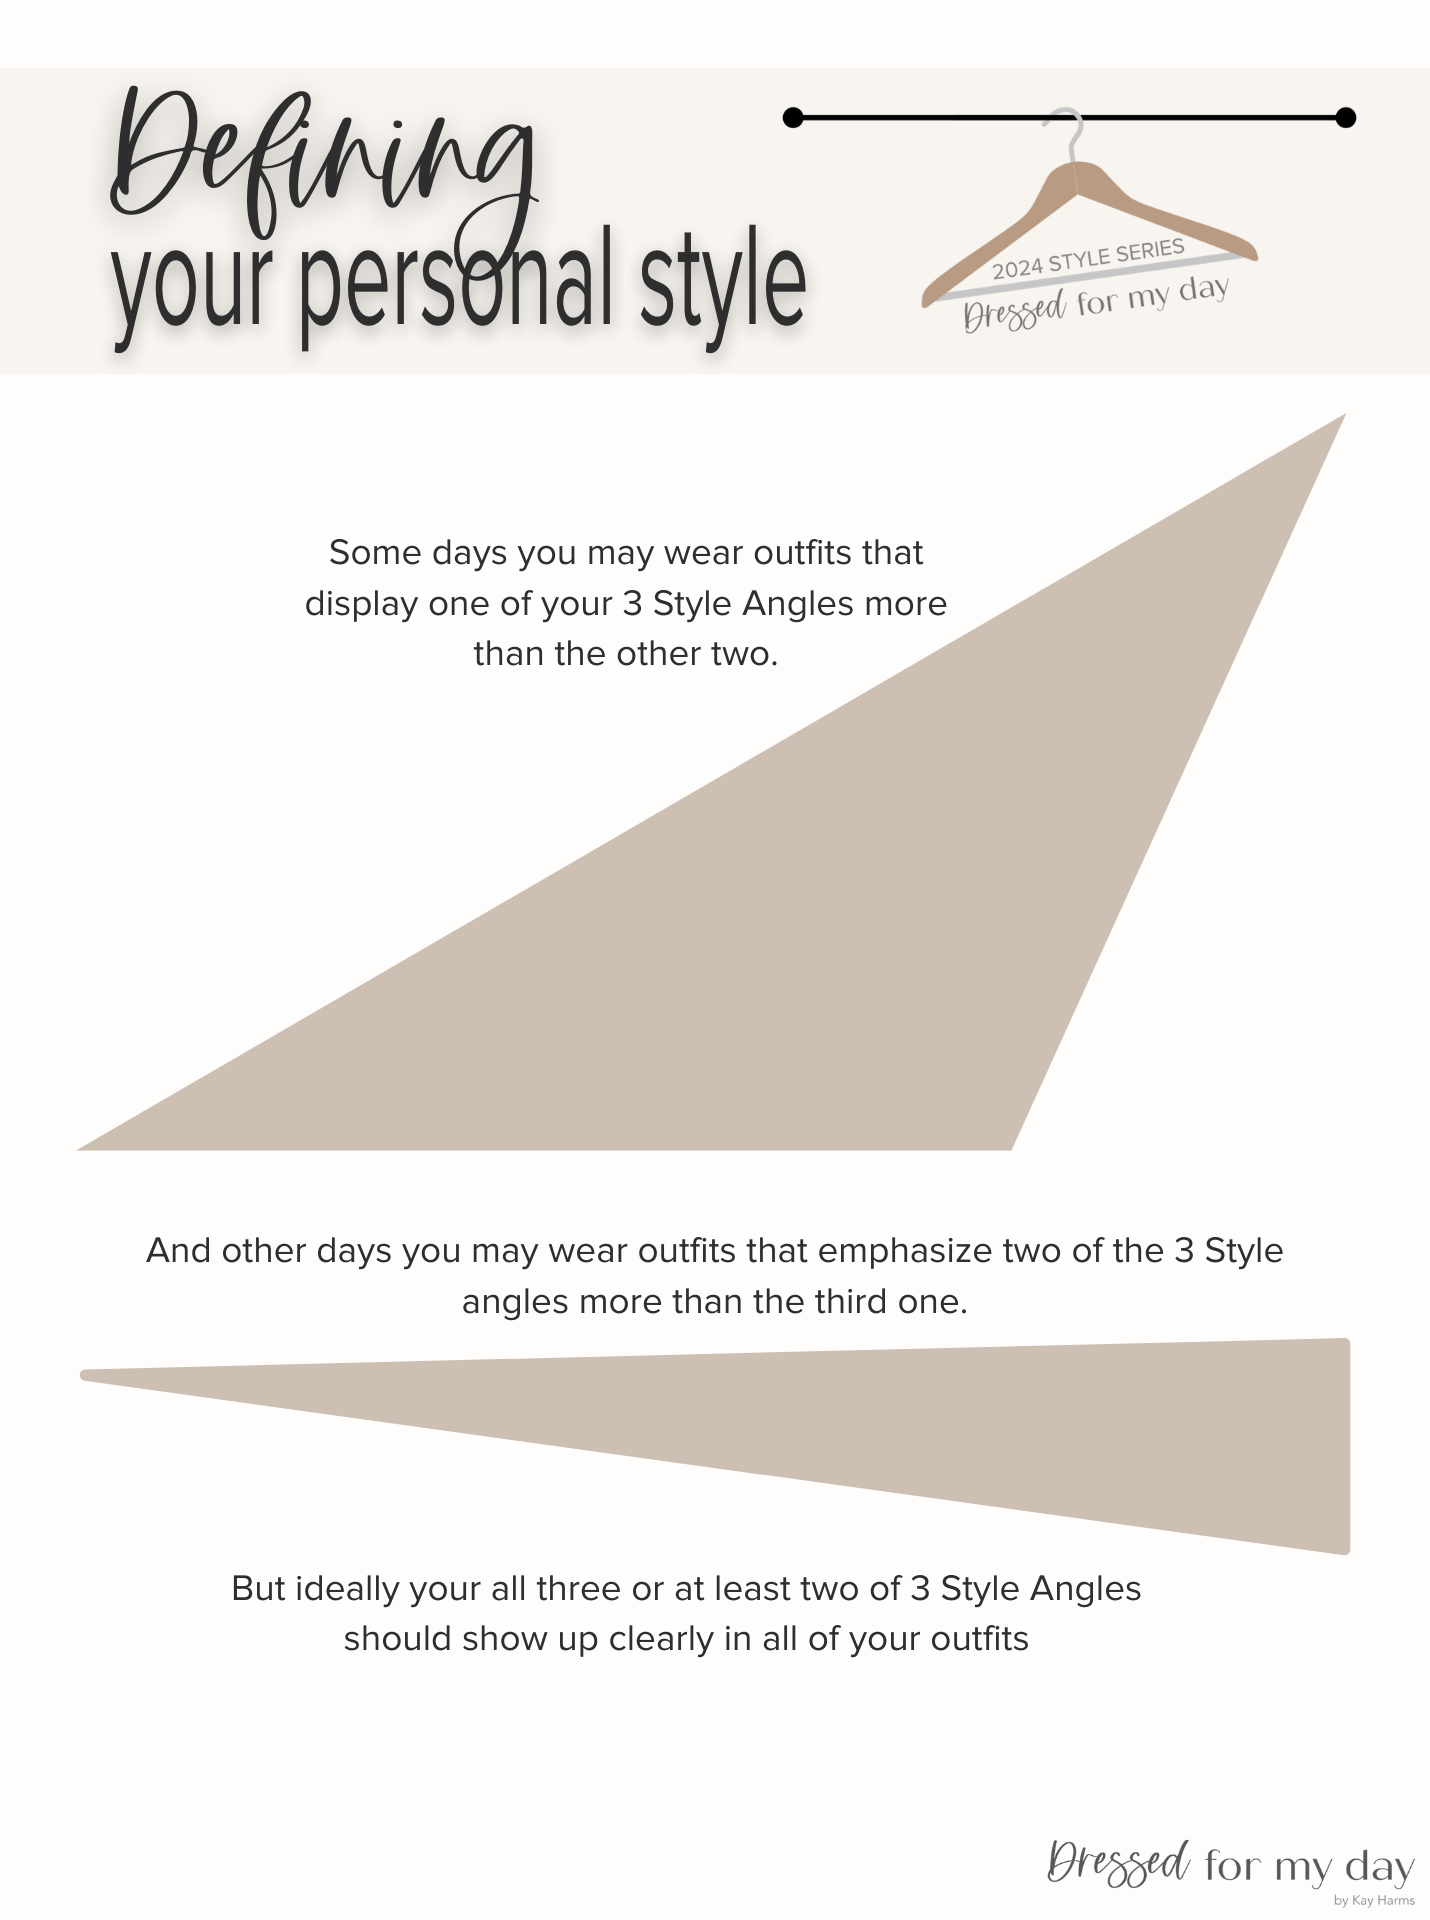 Personal Style Angles in Different Proportions